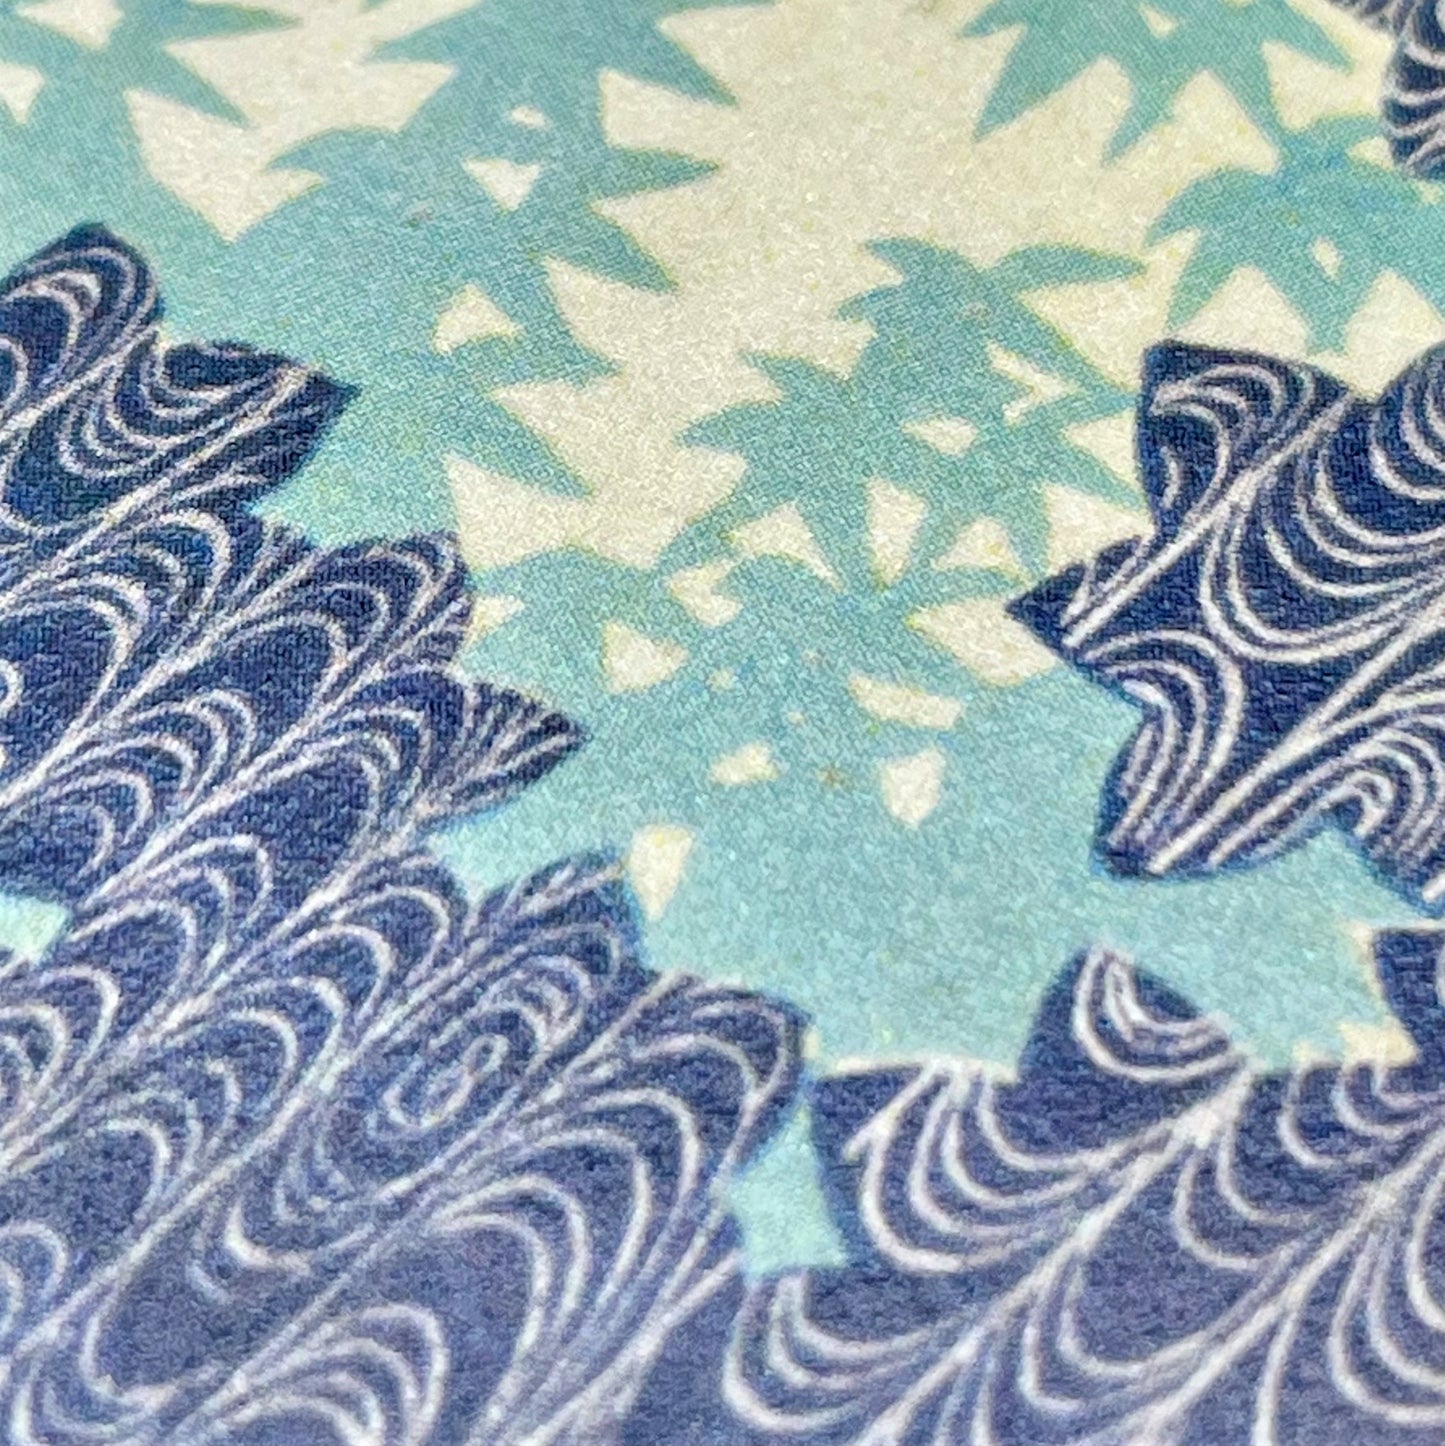 greetings card showing a drawing of a blue kimono with maple leaf design, close up of the pattern